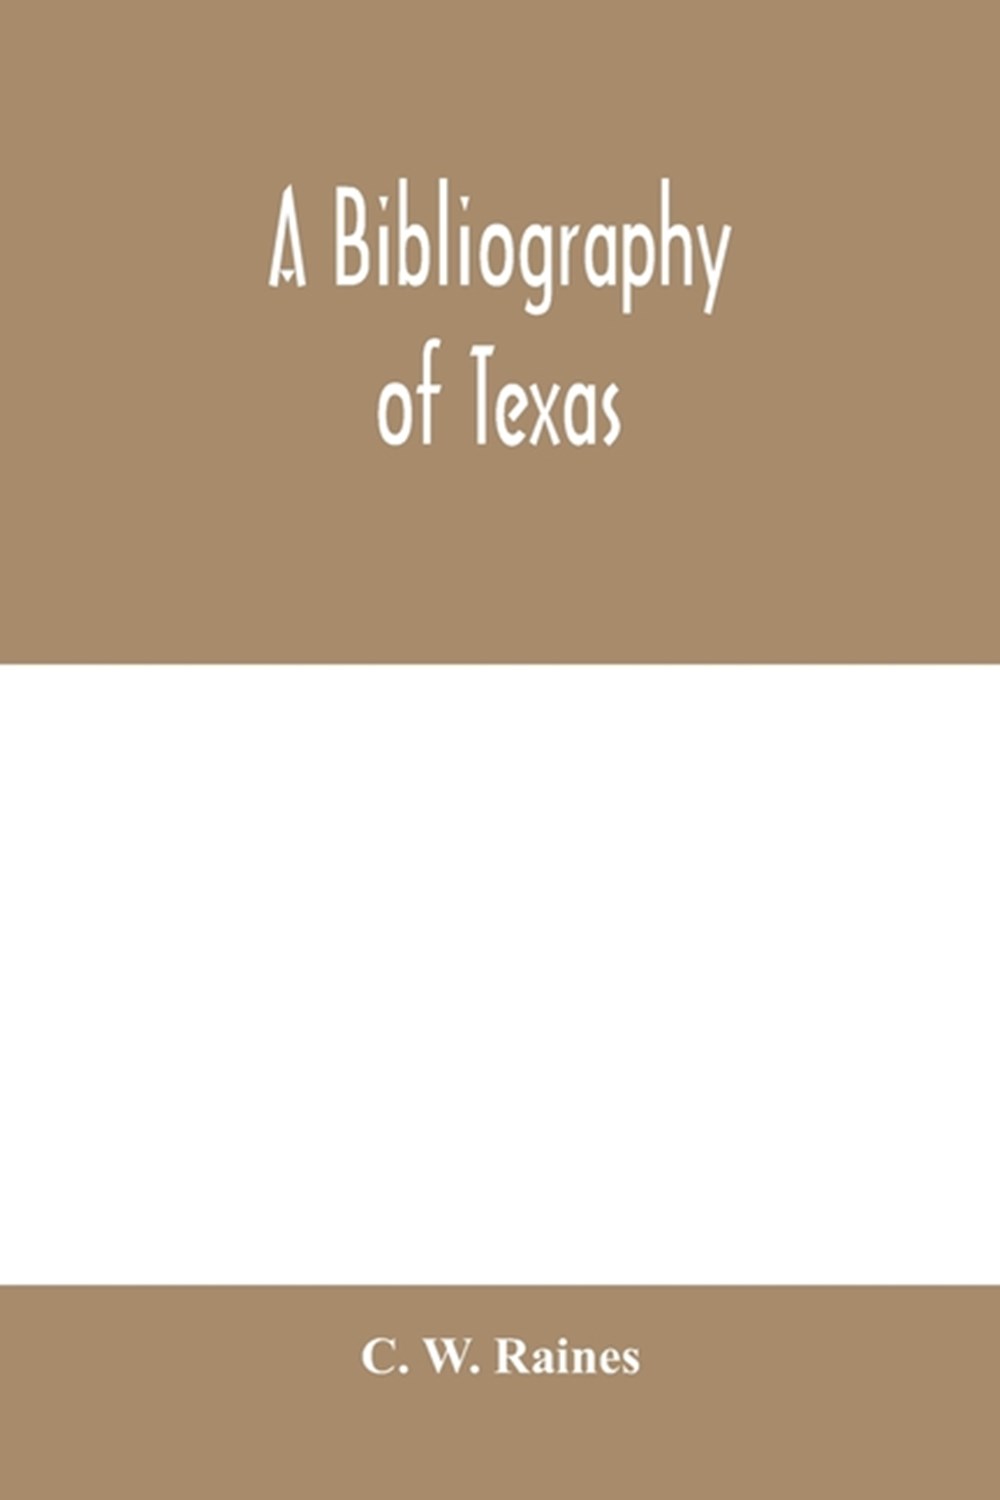 bibliography of Texas: being a descriptive list of books, pamphlets, and documents relating to Texas